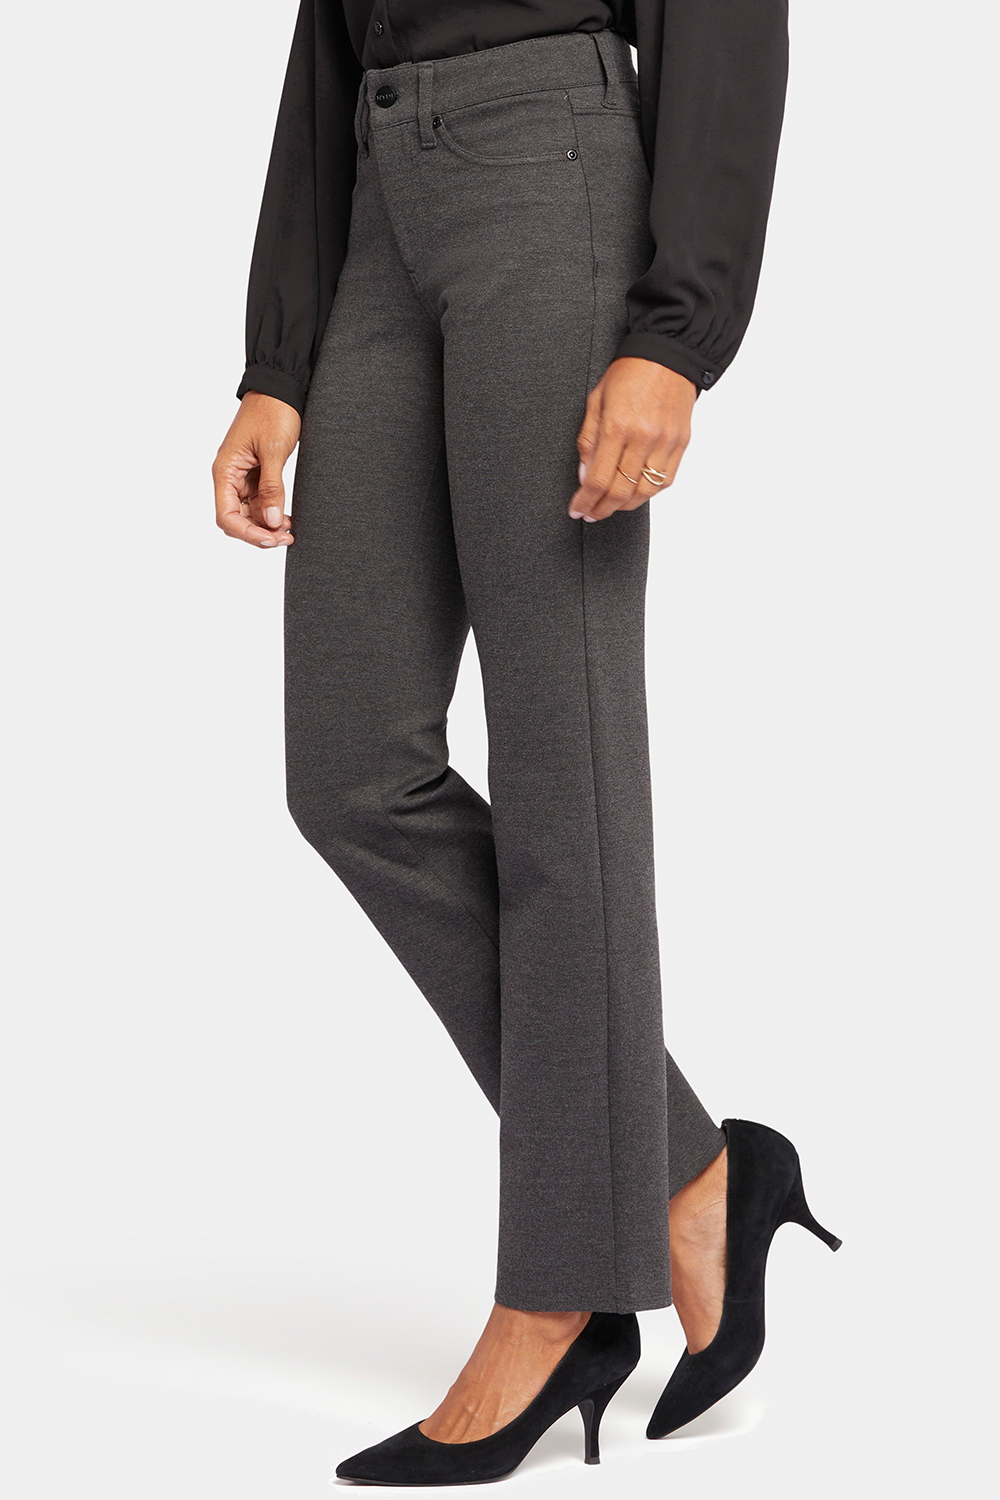 Marilyn Straight Pants In Petite Sculpt-Her™ Collection - Charcoal ...